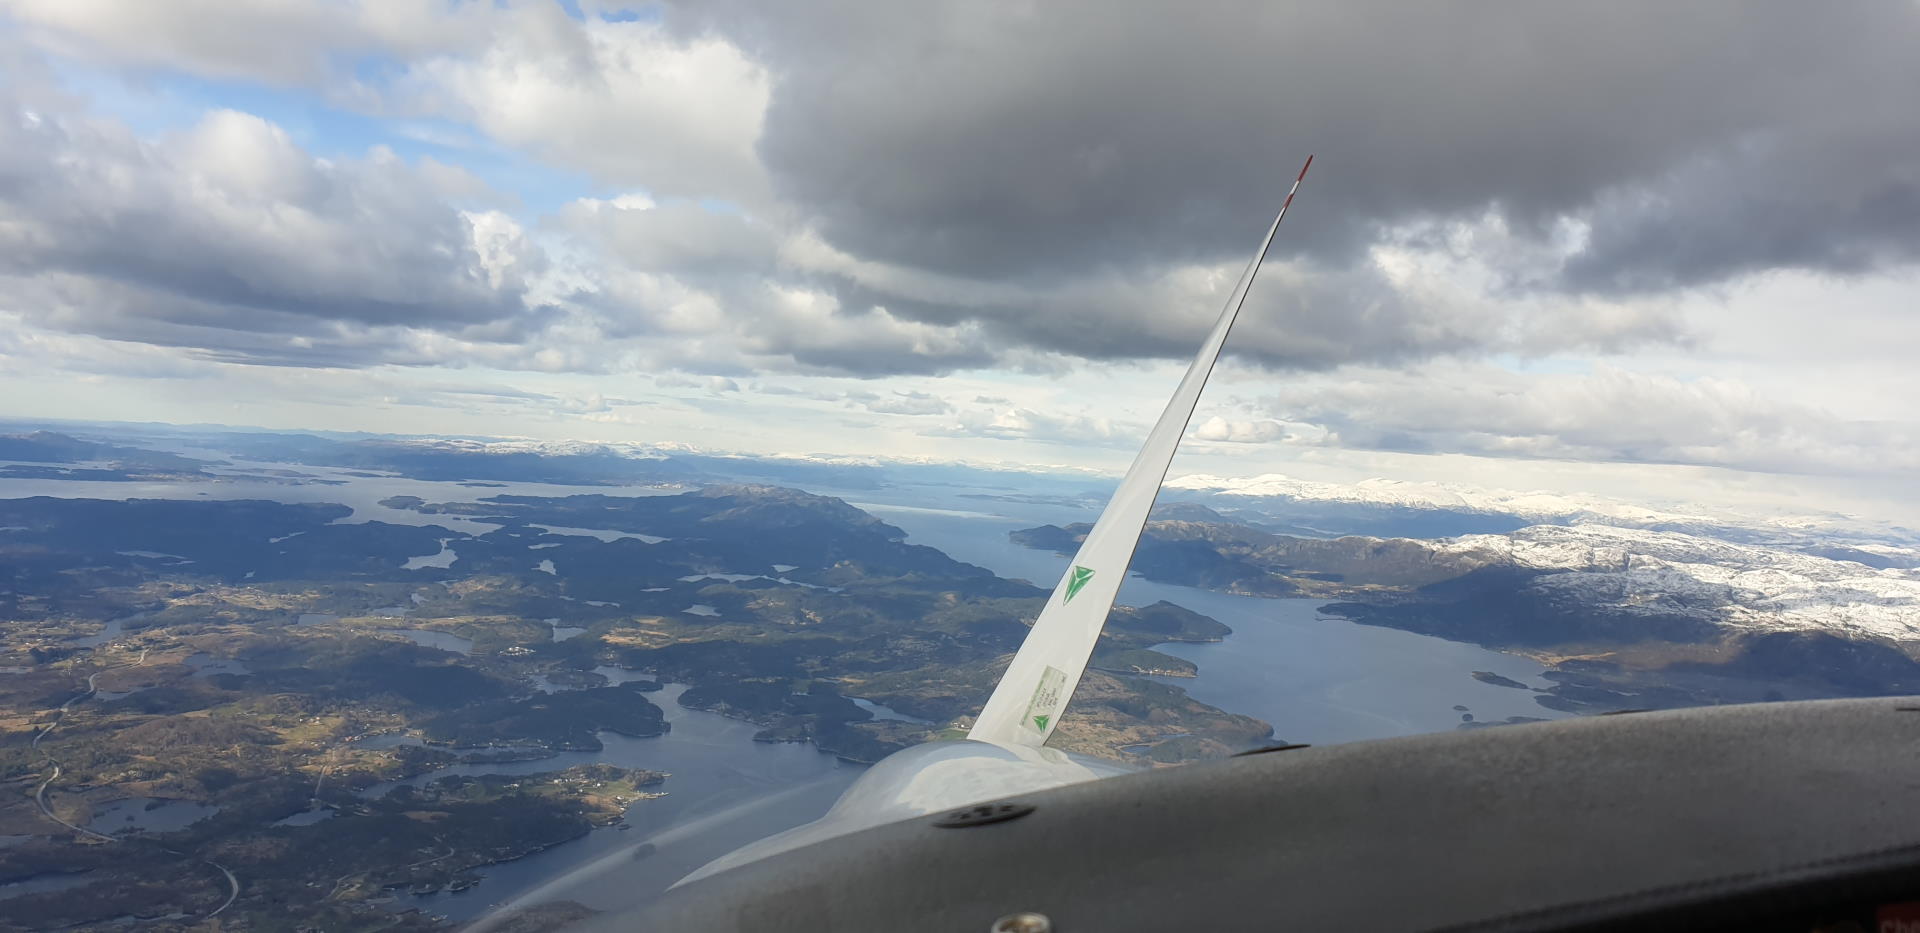 image from First time in a motor glider